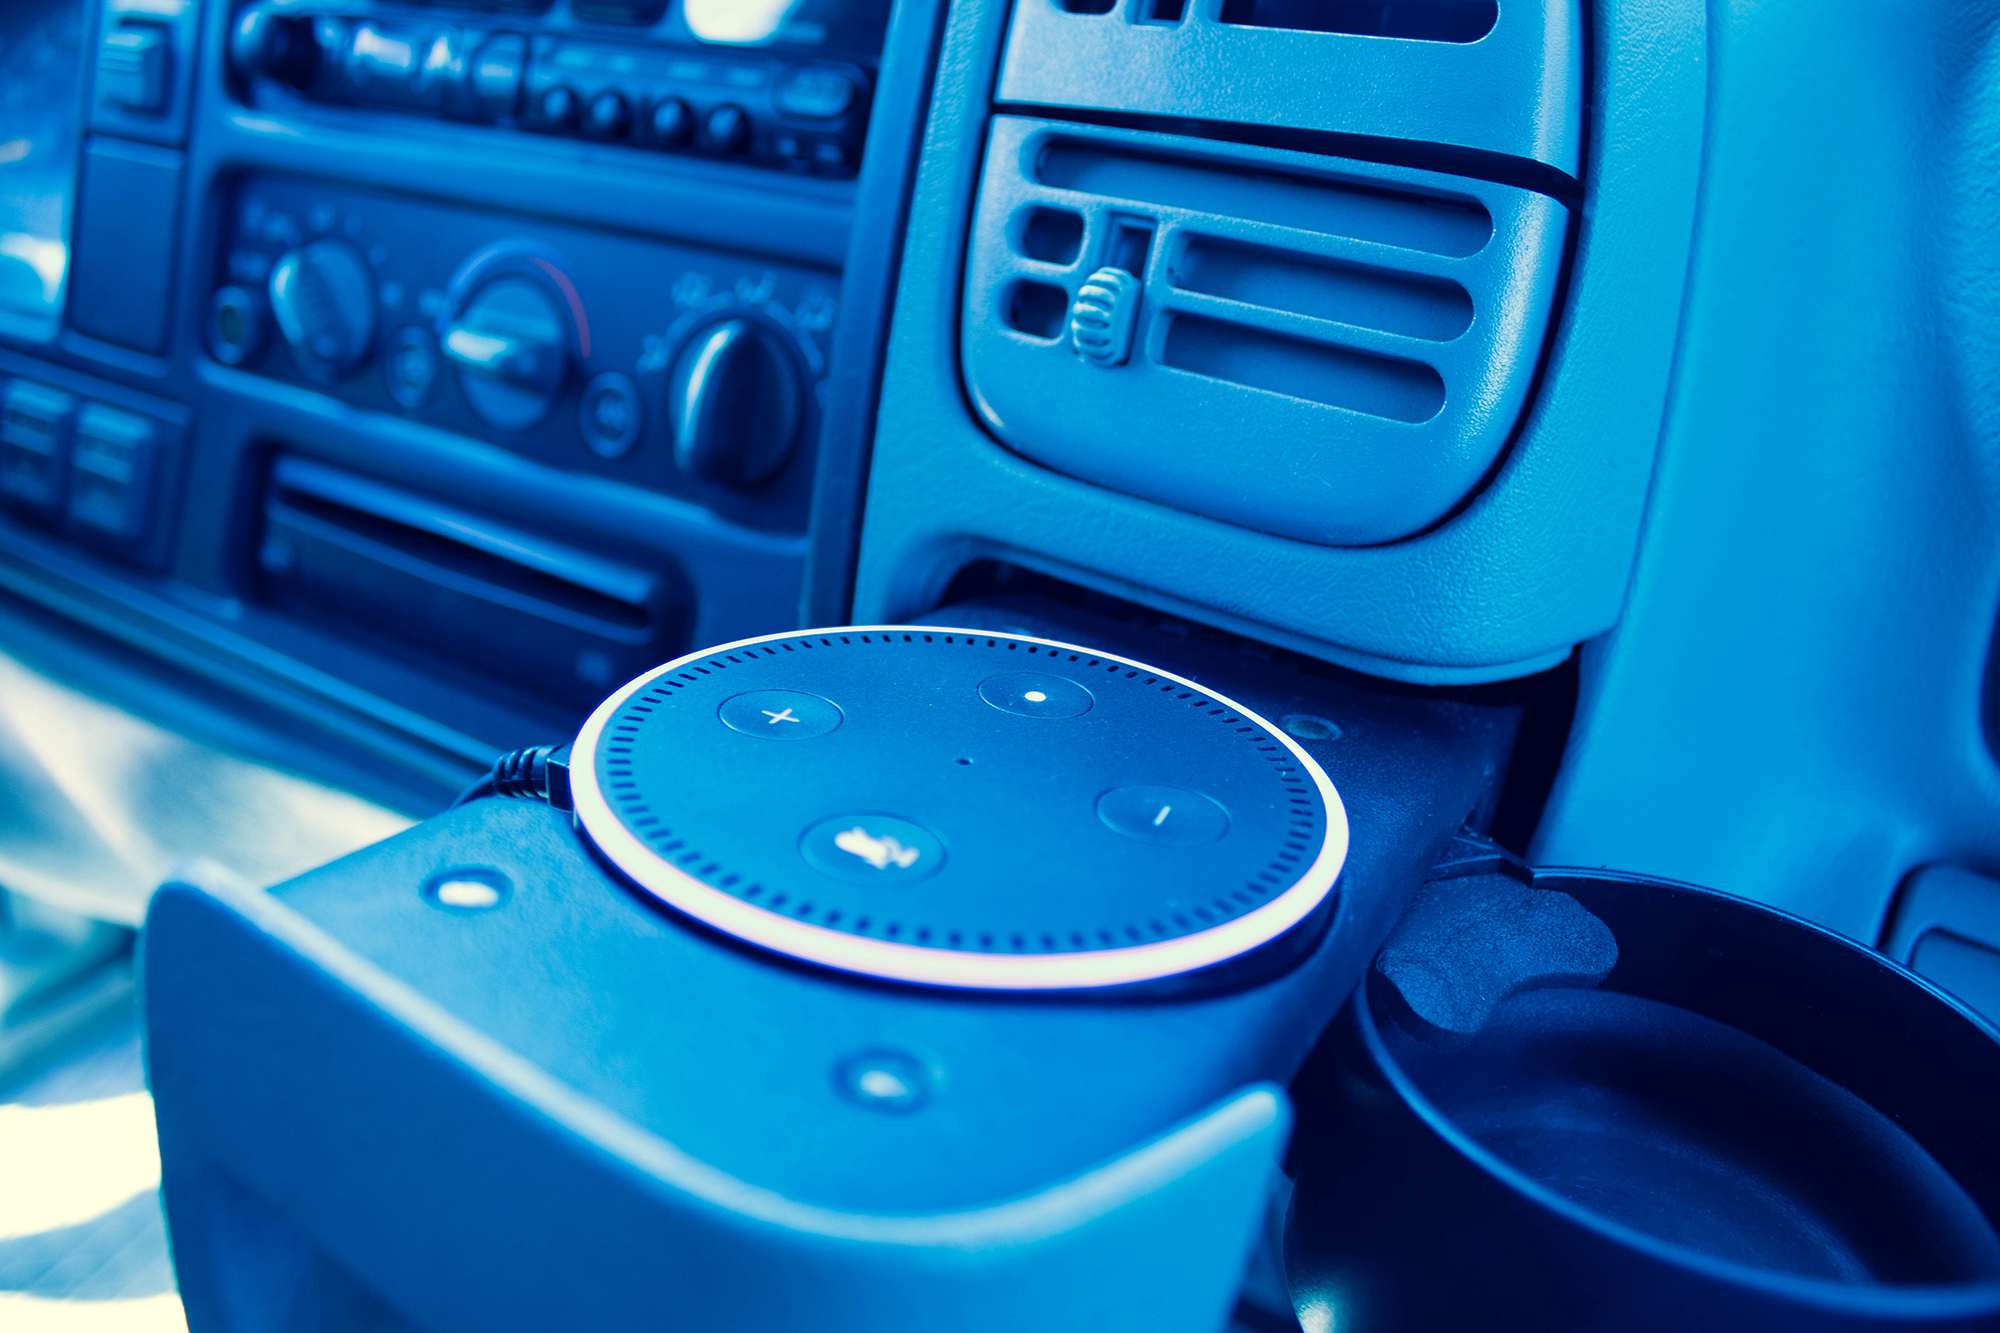 How To Set Up Alexa In Your Car